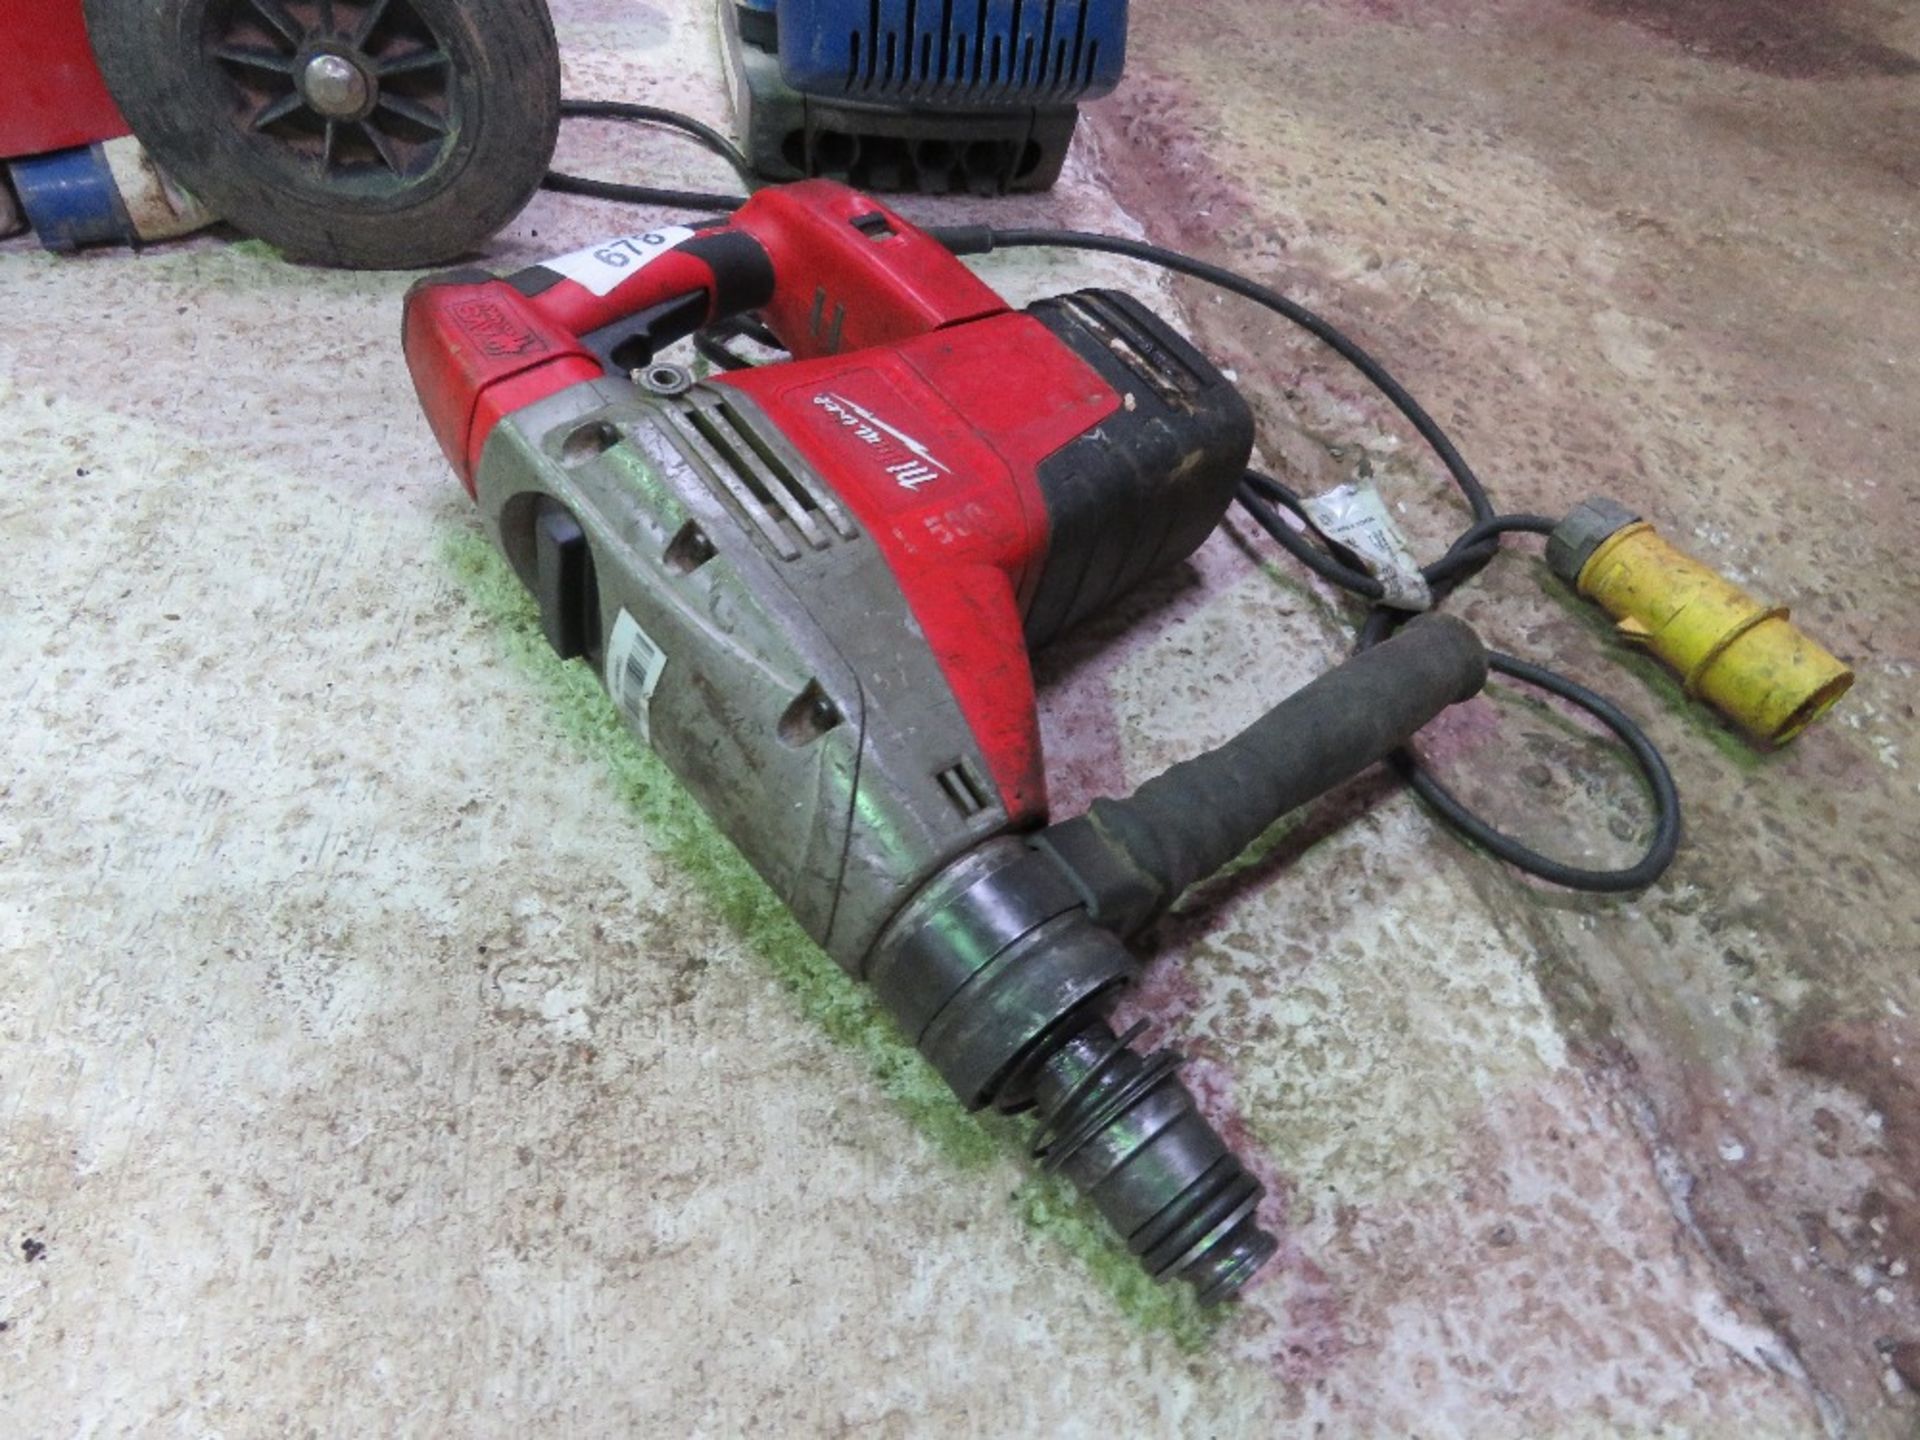 MILWAUKEE 110VOLT BREAKER DRILL, CHUCK REQUIRES ATTENTION - Image 3 of 3